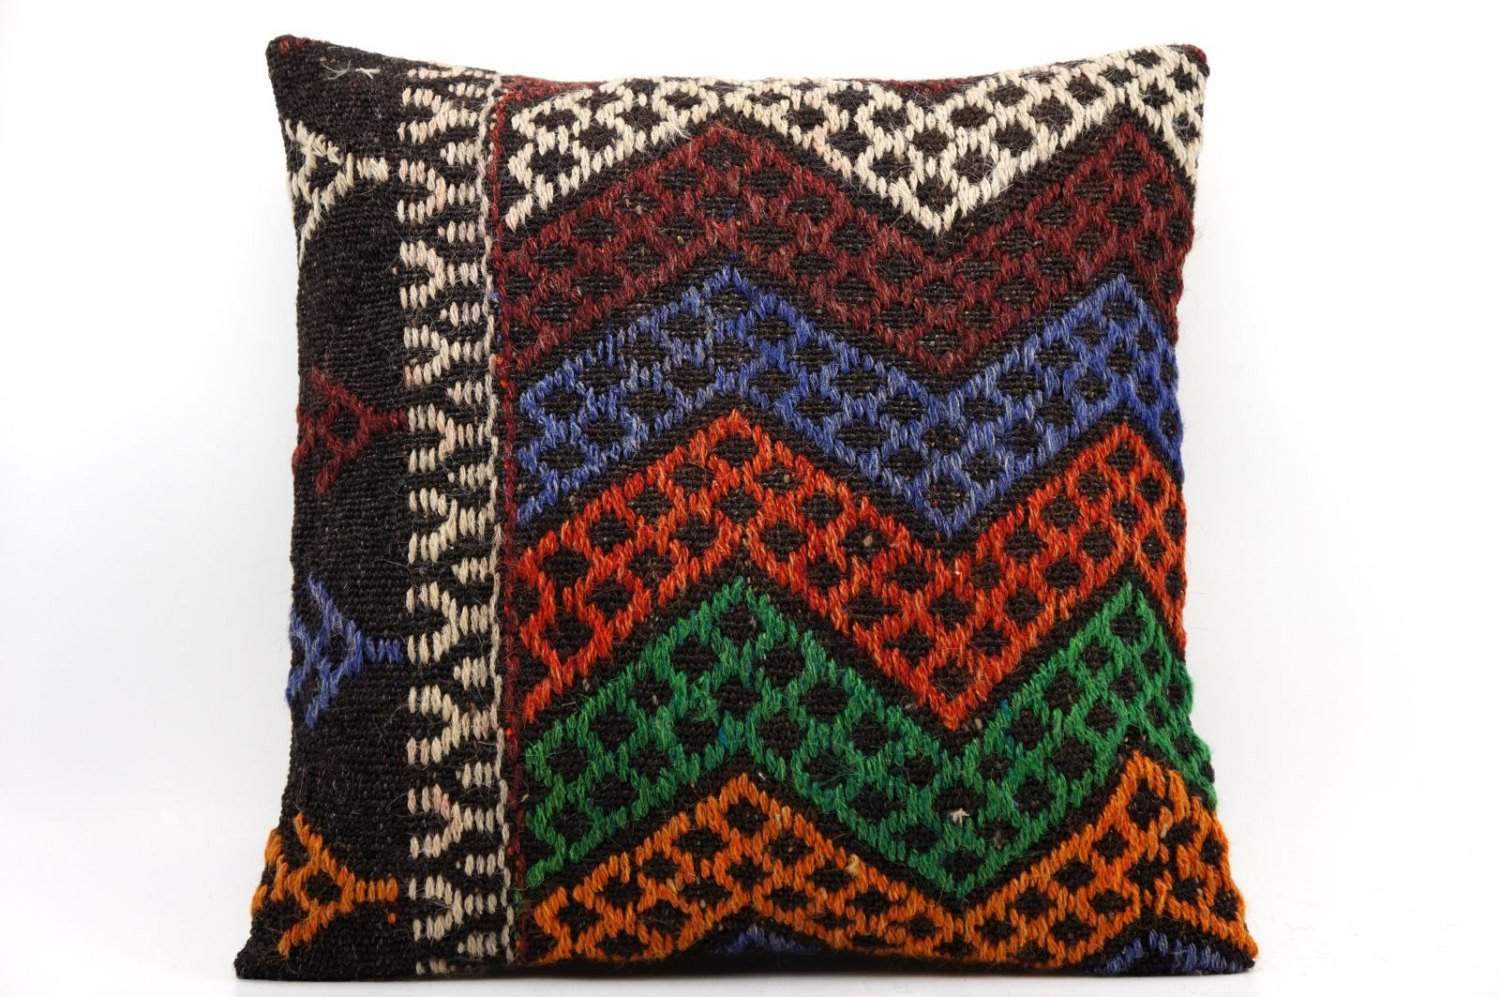 CLEARANCE 16x16 Vintage Hand Woven Kilim Pillow  494,white,orange,green,blue,black,red,claret red,chevron - kilimpillowstore
 - 1